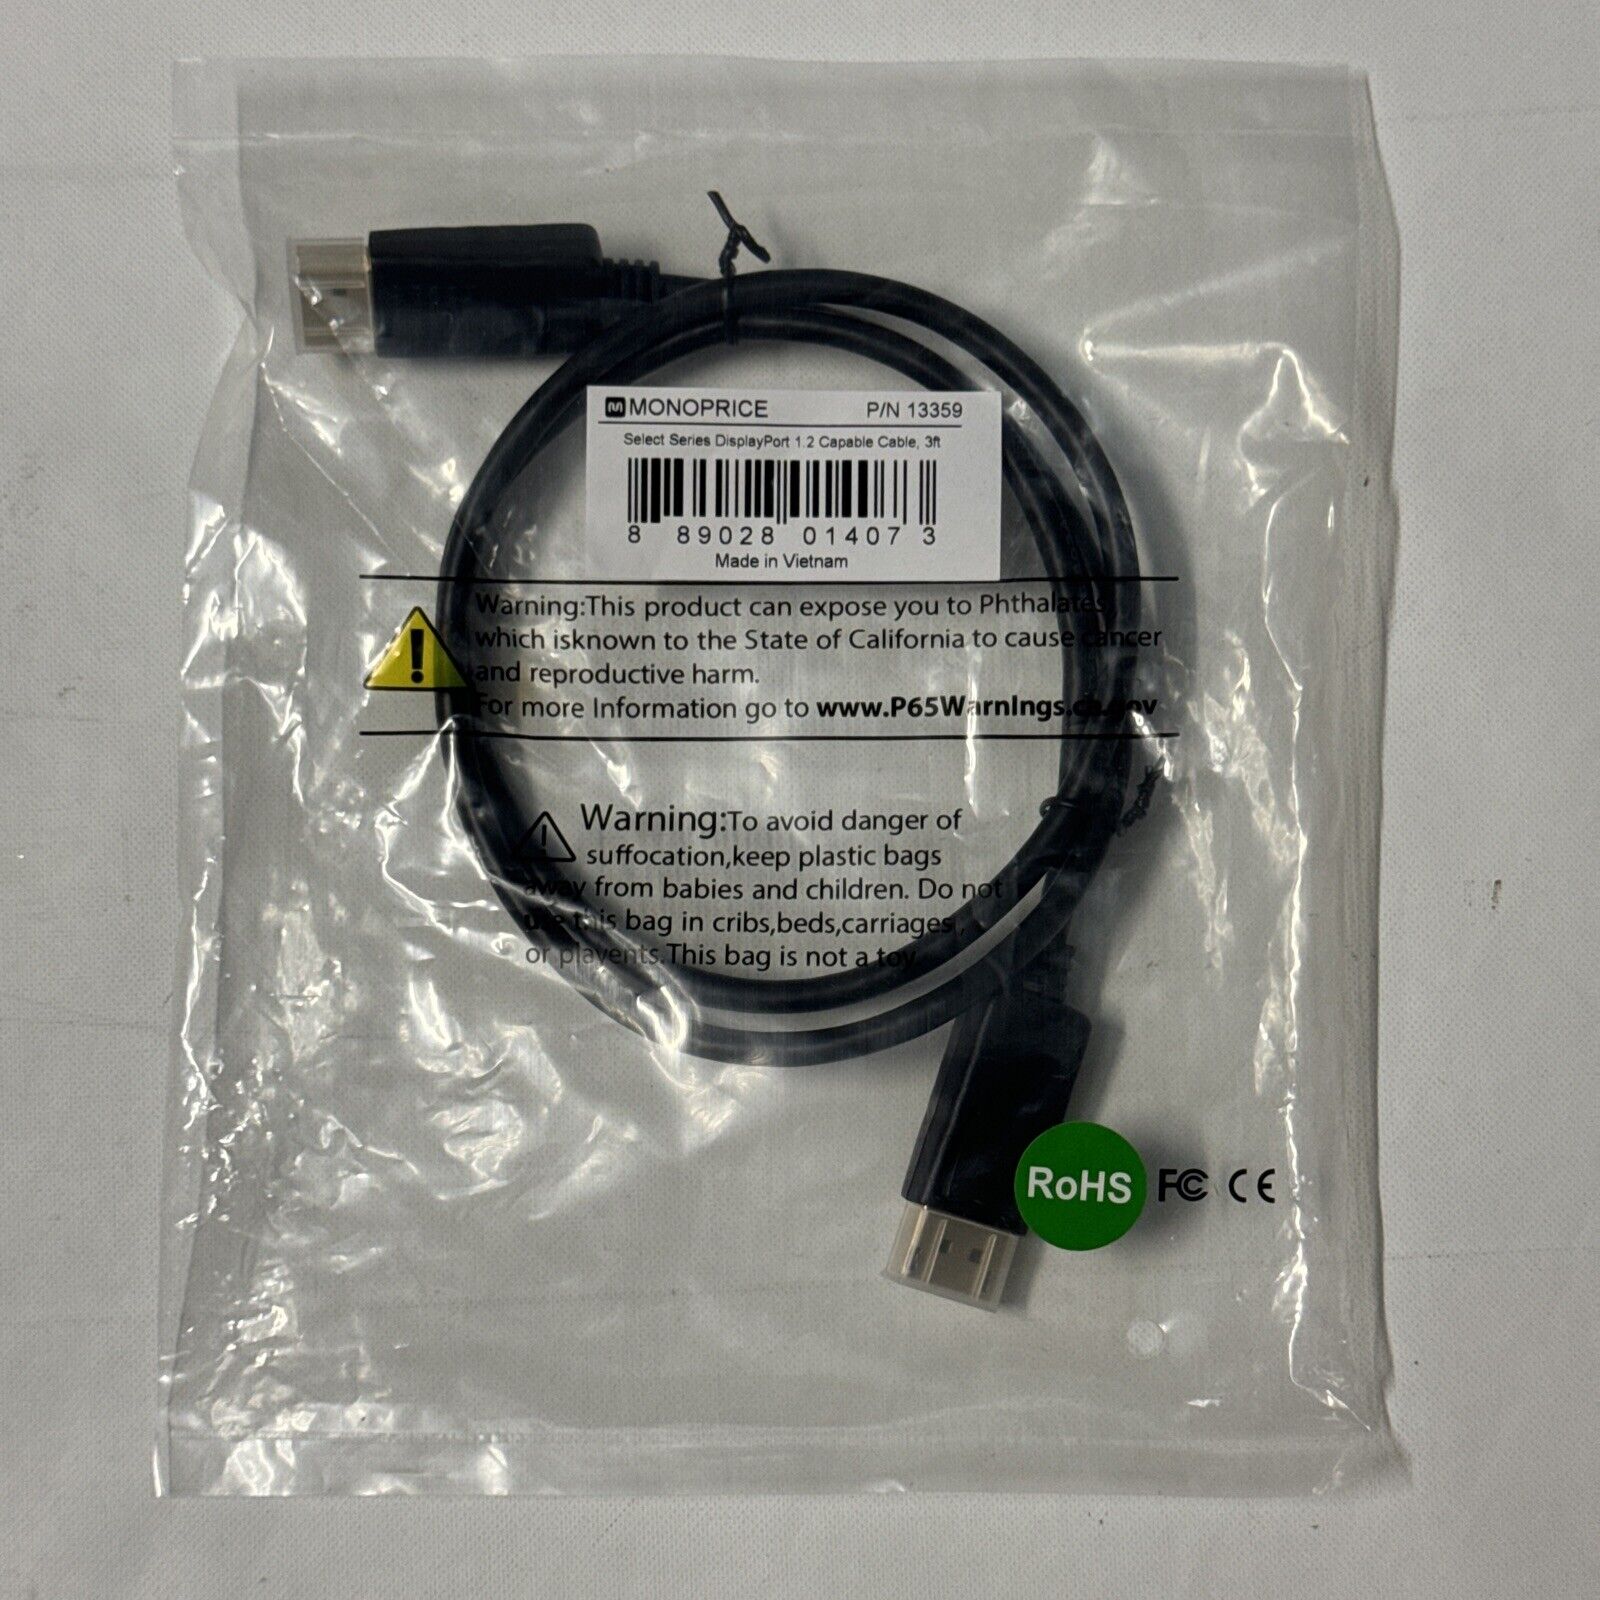 Monoprice, Select Series DisplayPort 1.2 Cable, 3ft, Part Number: 13359